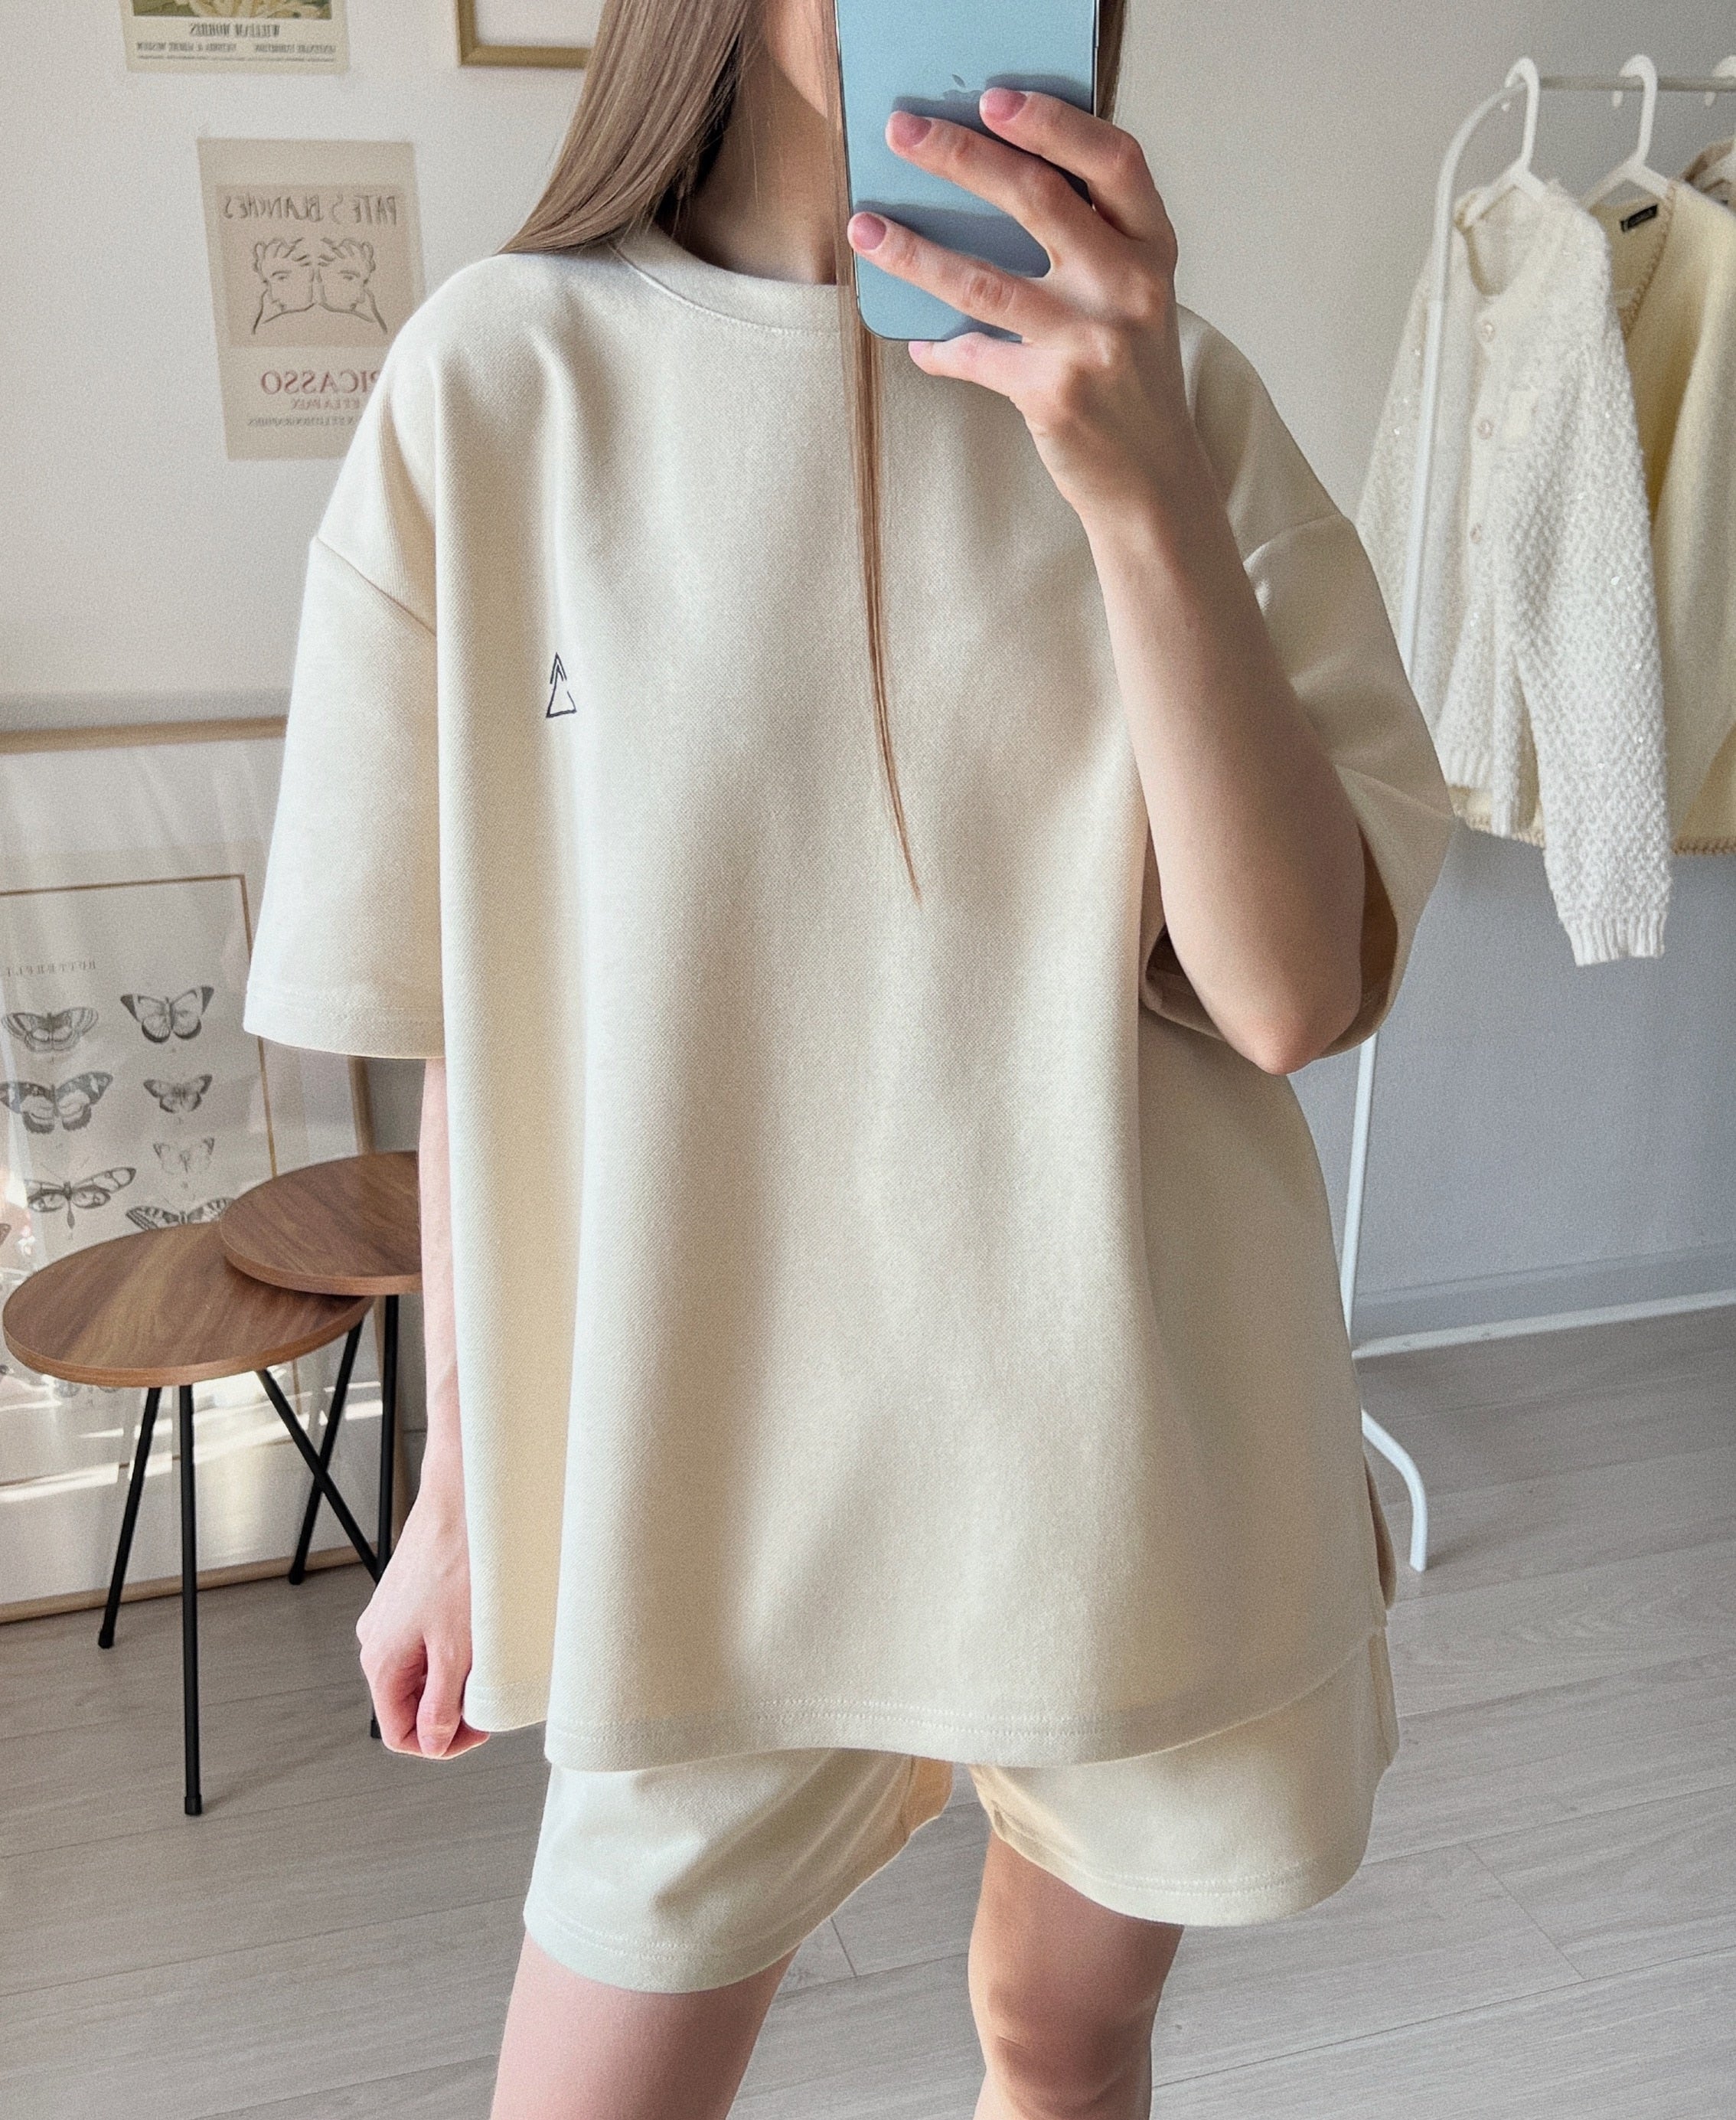 Prettyswomen Suit Shorts With Ladies T-Shirt And Top Loose Oversized Cotton Summer Two Piece Ladies Classic Activewear Casual